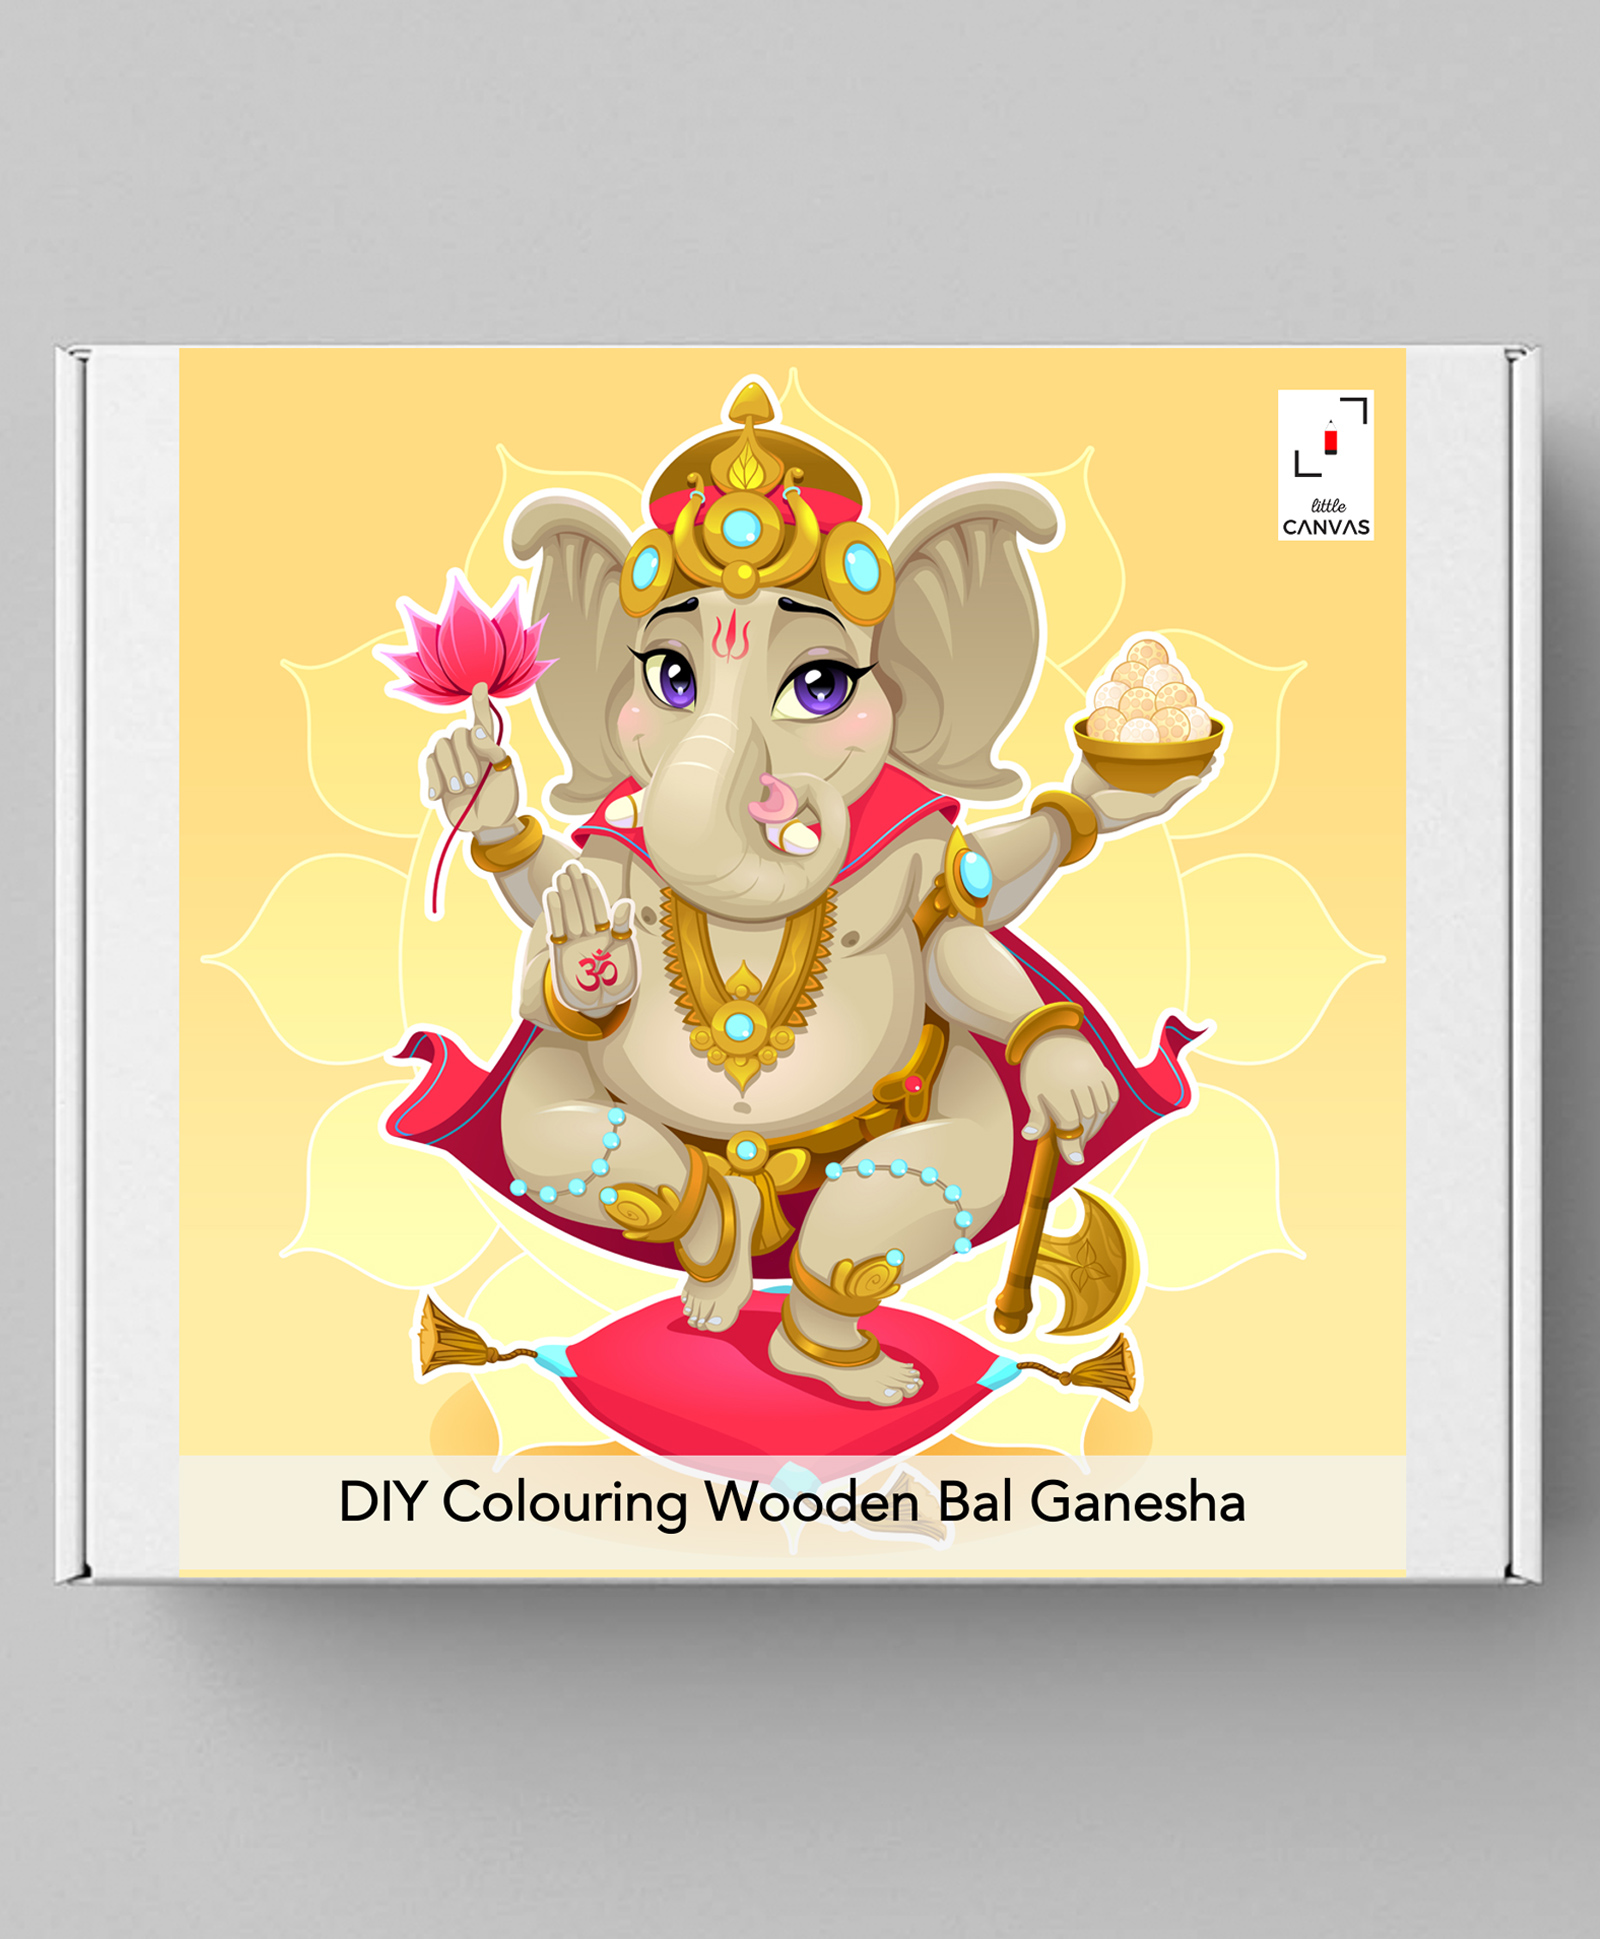 Little Canvas DIY Colouring Wooden Bal Ganesha Activity Box 12 Pieces -  Multicolor Online India, Buy Art & Creativity Toys for (3-6 Years) at   - 10105582